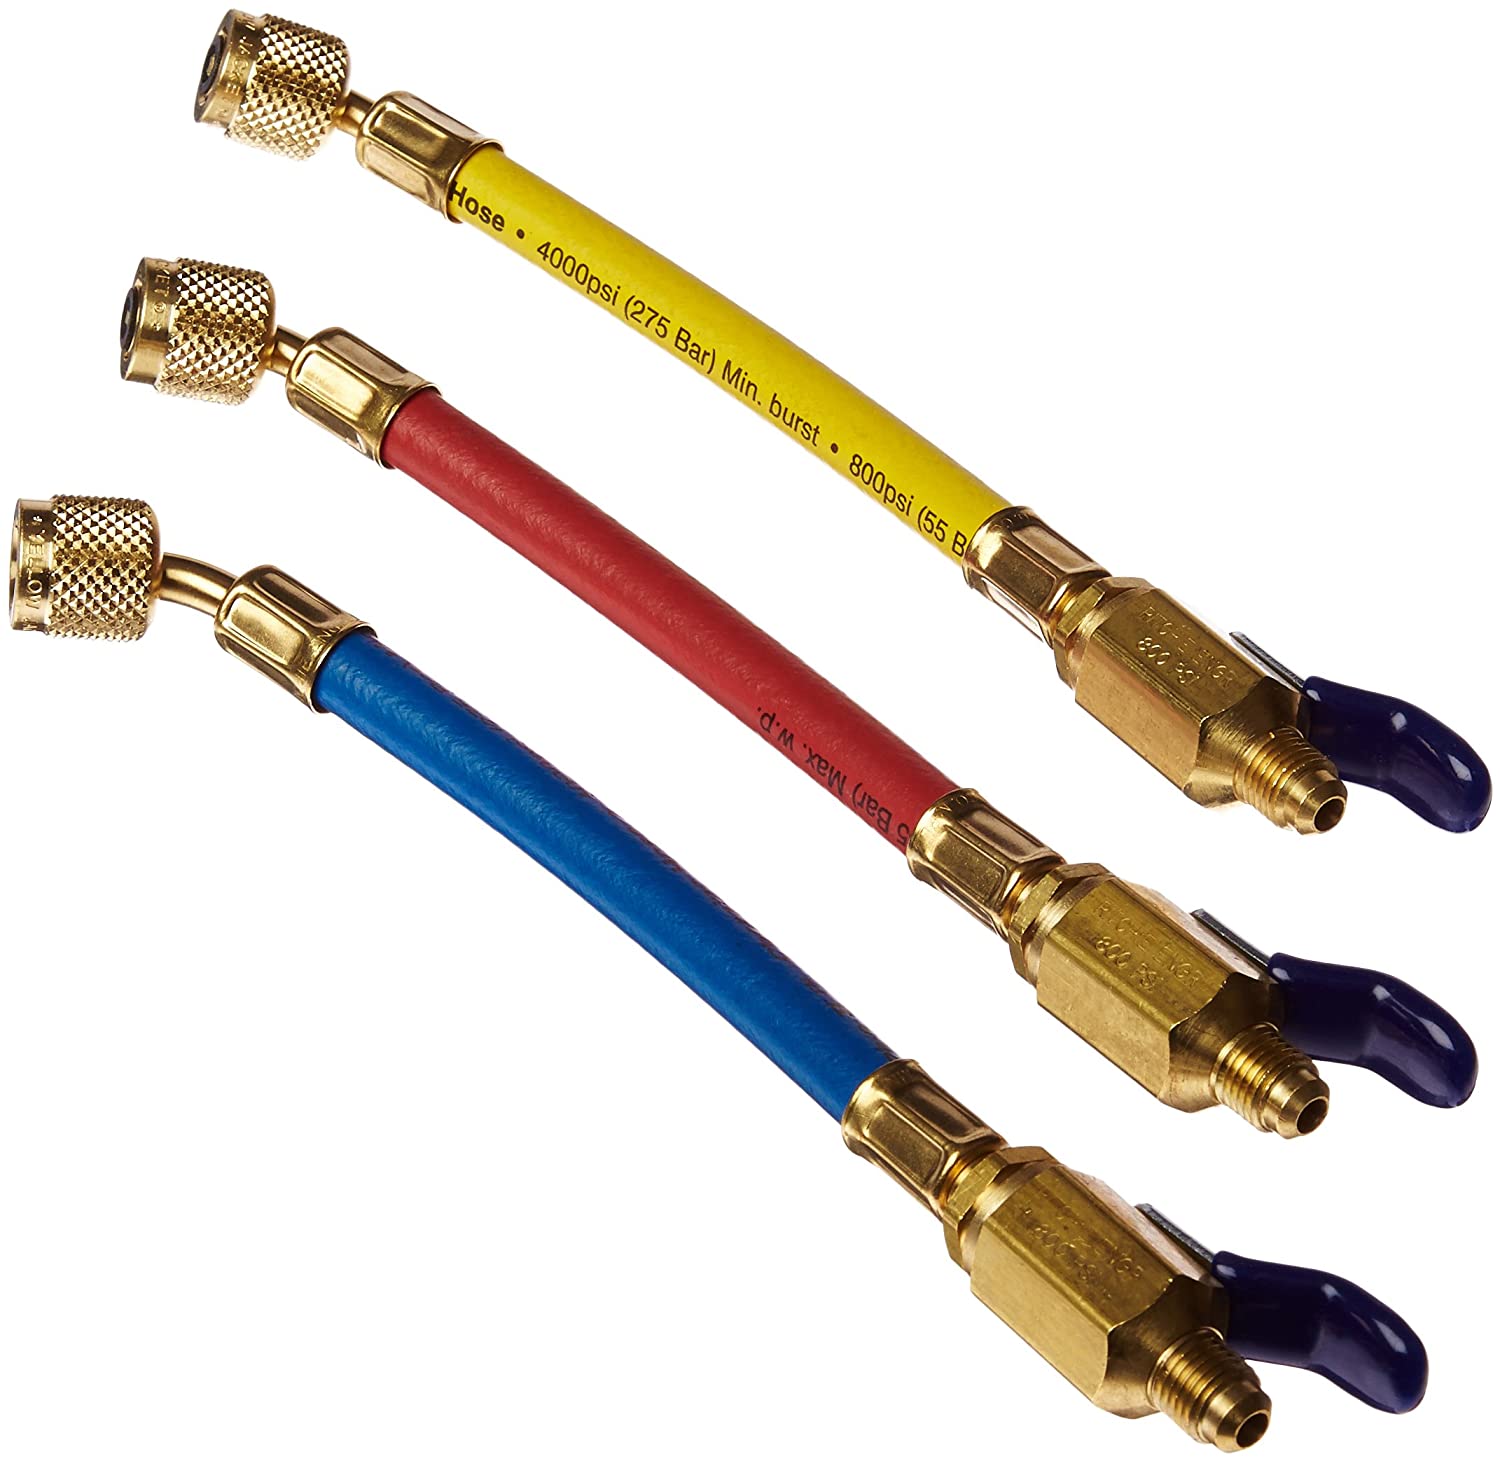 Yellow Jacket 25980 9" FlexFlow and Low Loss Adapter Hoses, Red/Yellow/Blue (Pack of 3)